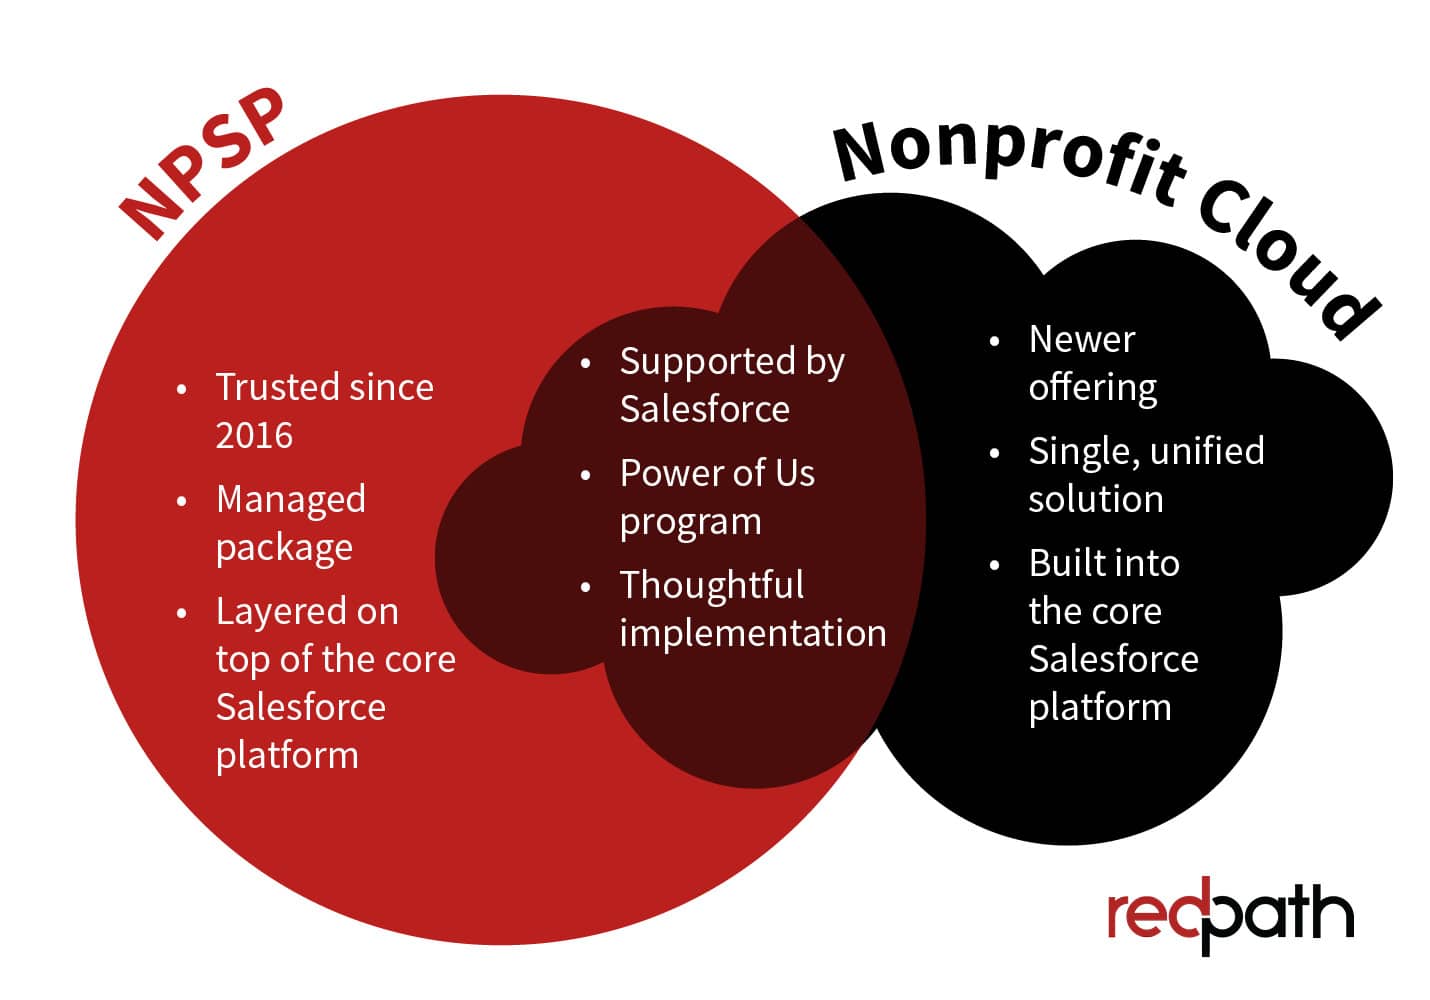 This Venn diagram and the text below explain key differences between NPSP and Nonprofit Cloud to inform your Salesforce for Nonprofits implementation decisions.